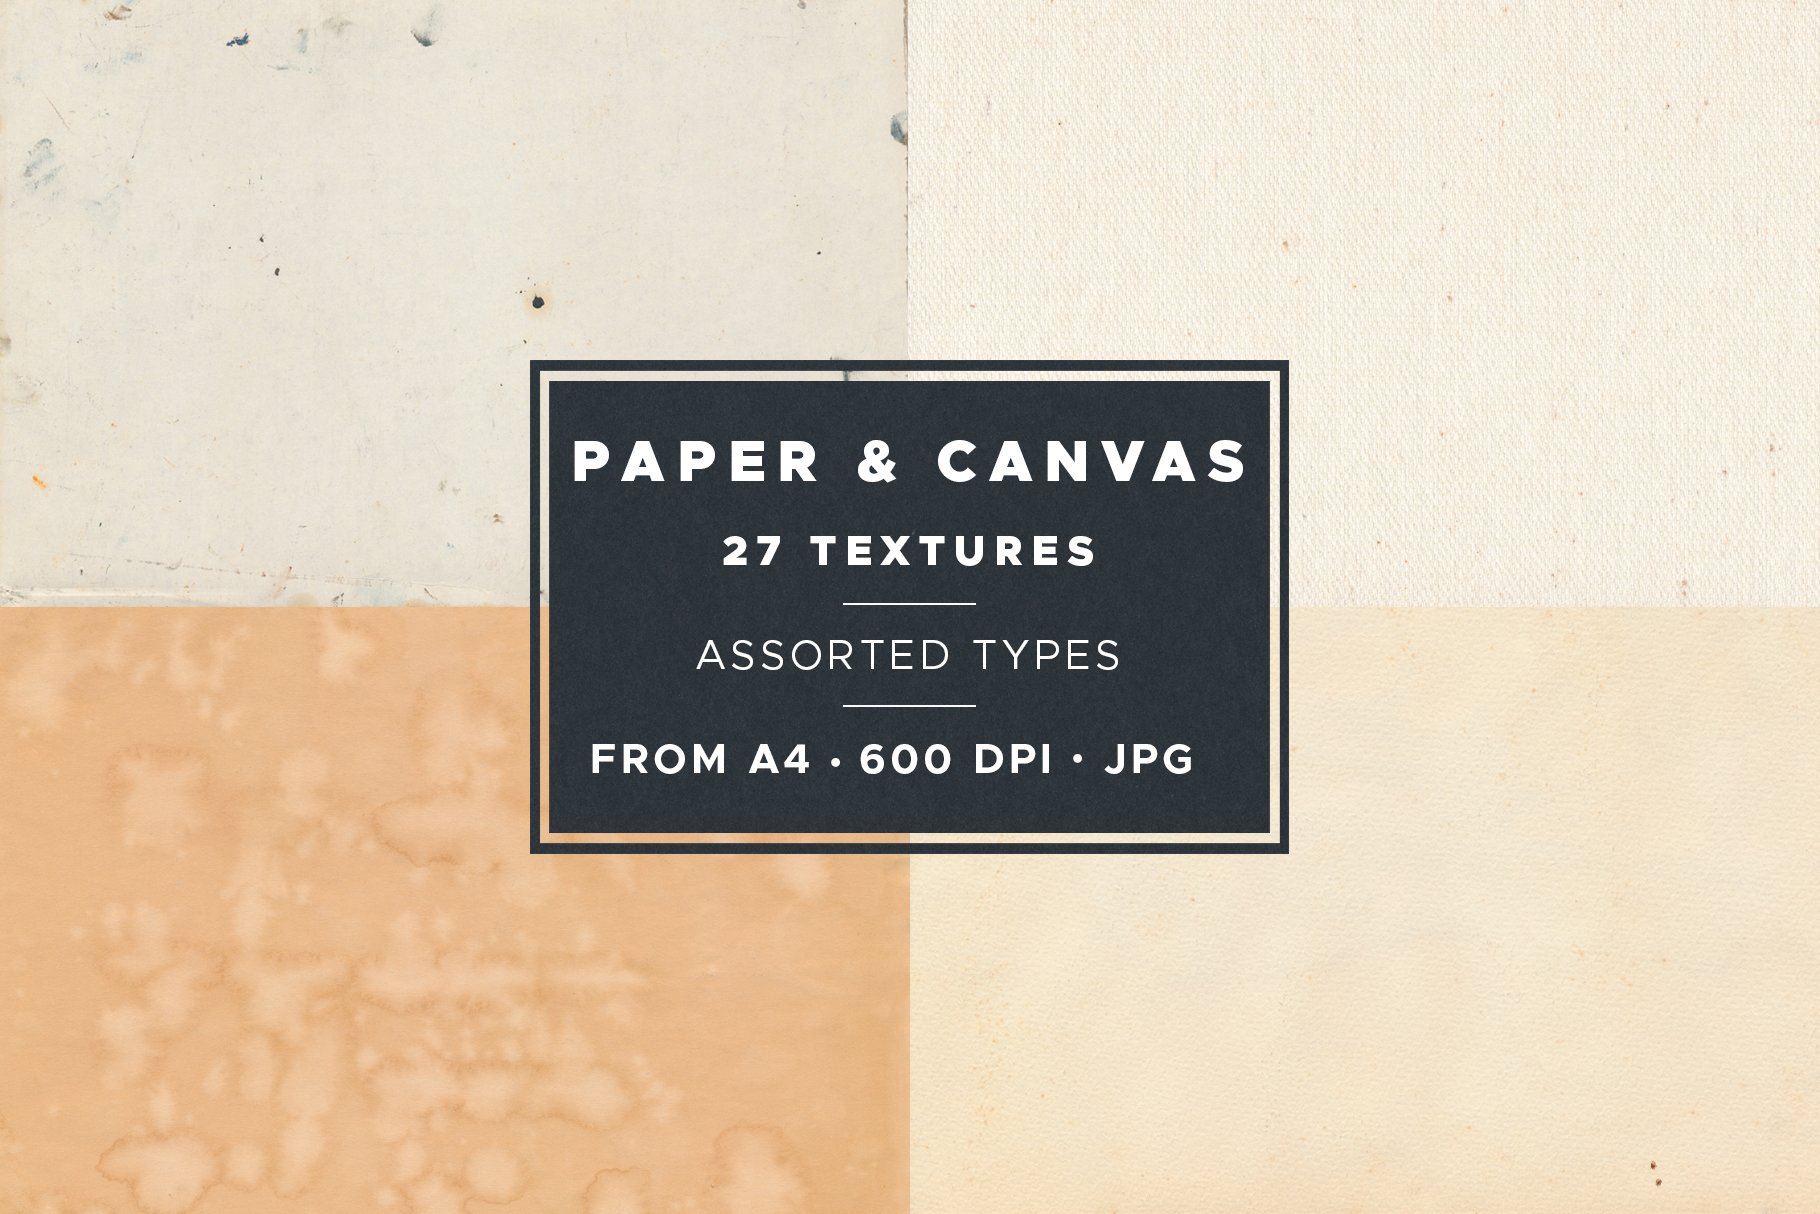 Paper & Canvas Textured Backgrounds cover image.